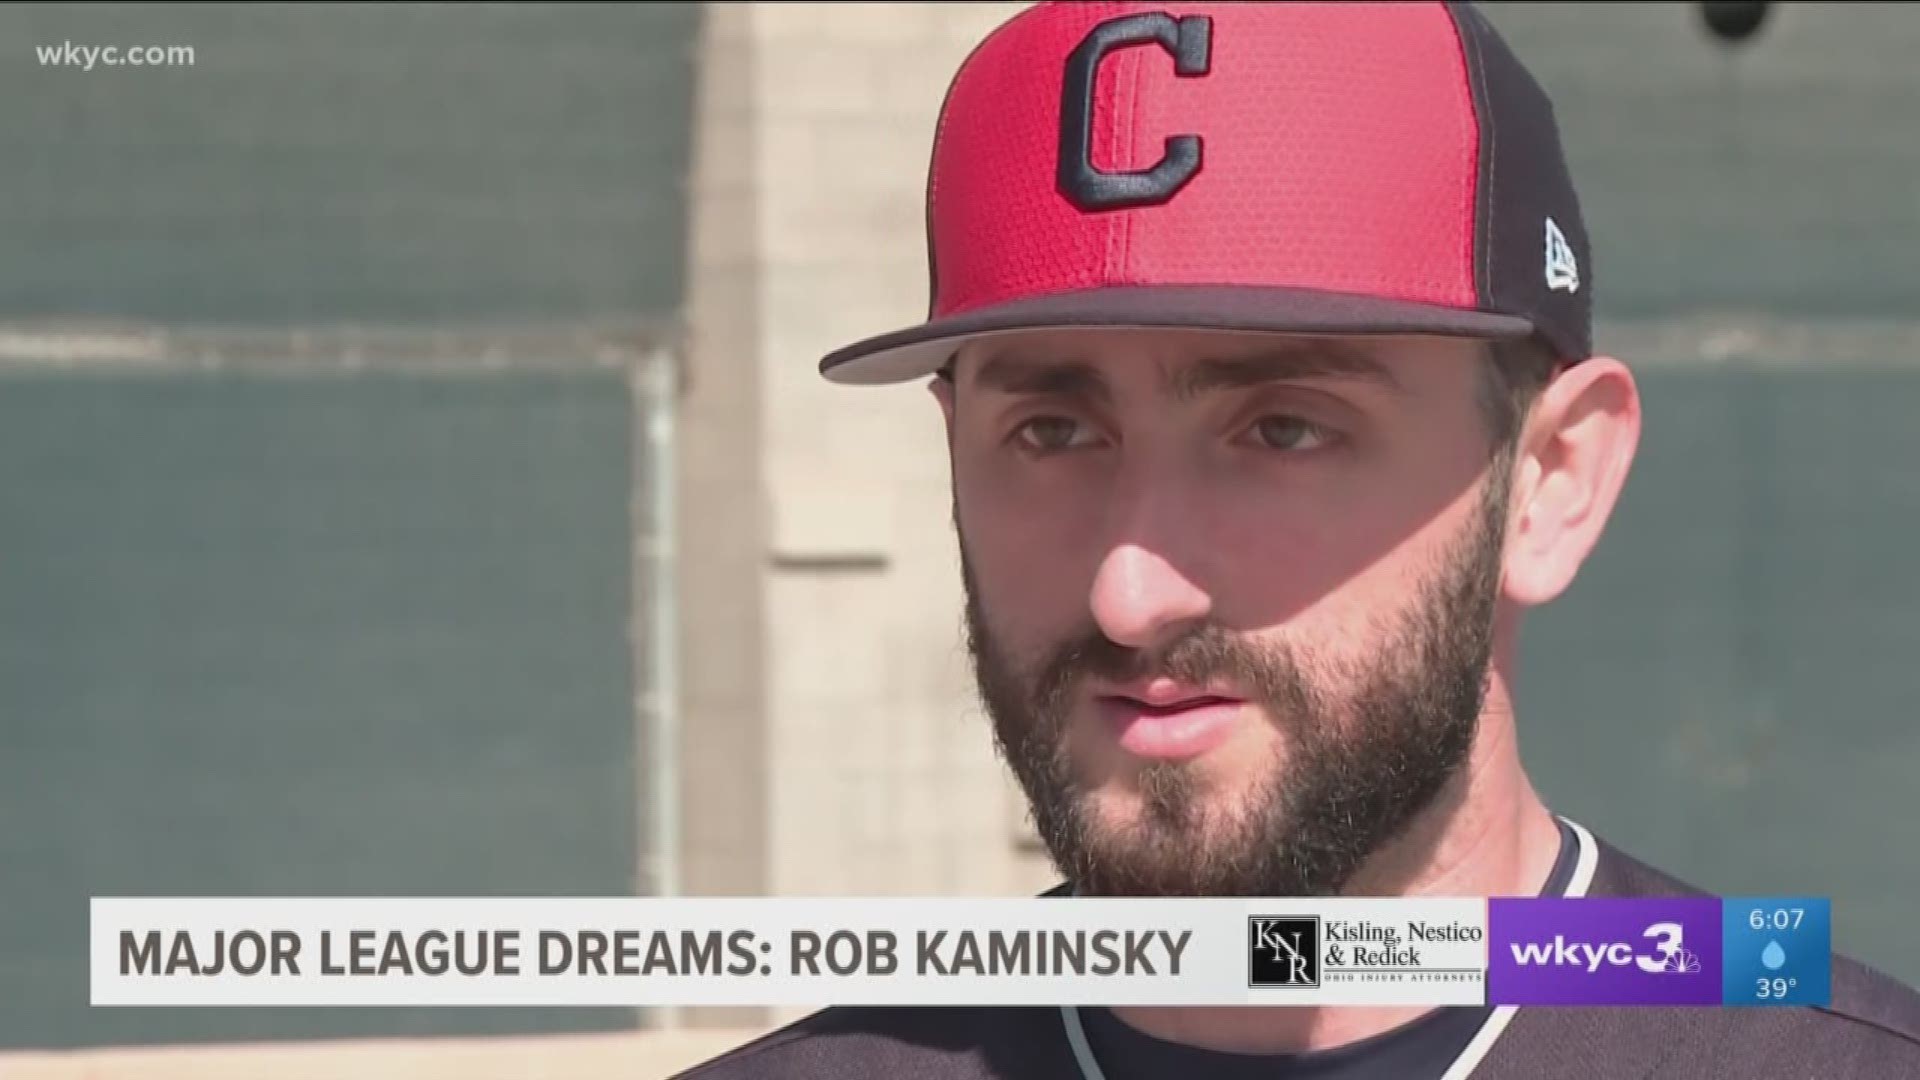 WKYC's Betsy Kling caught up with Rob Kaminsky during his first big league camp.